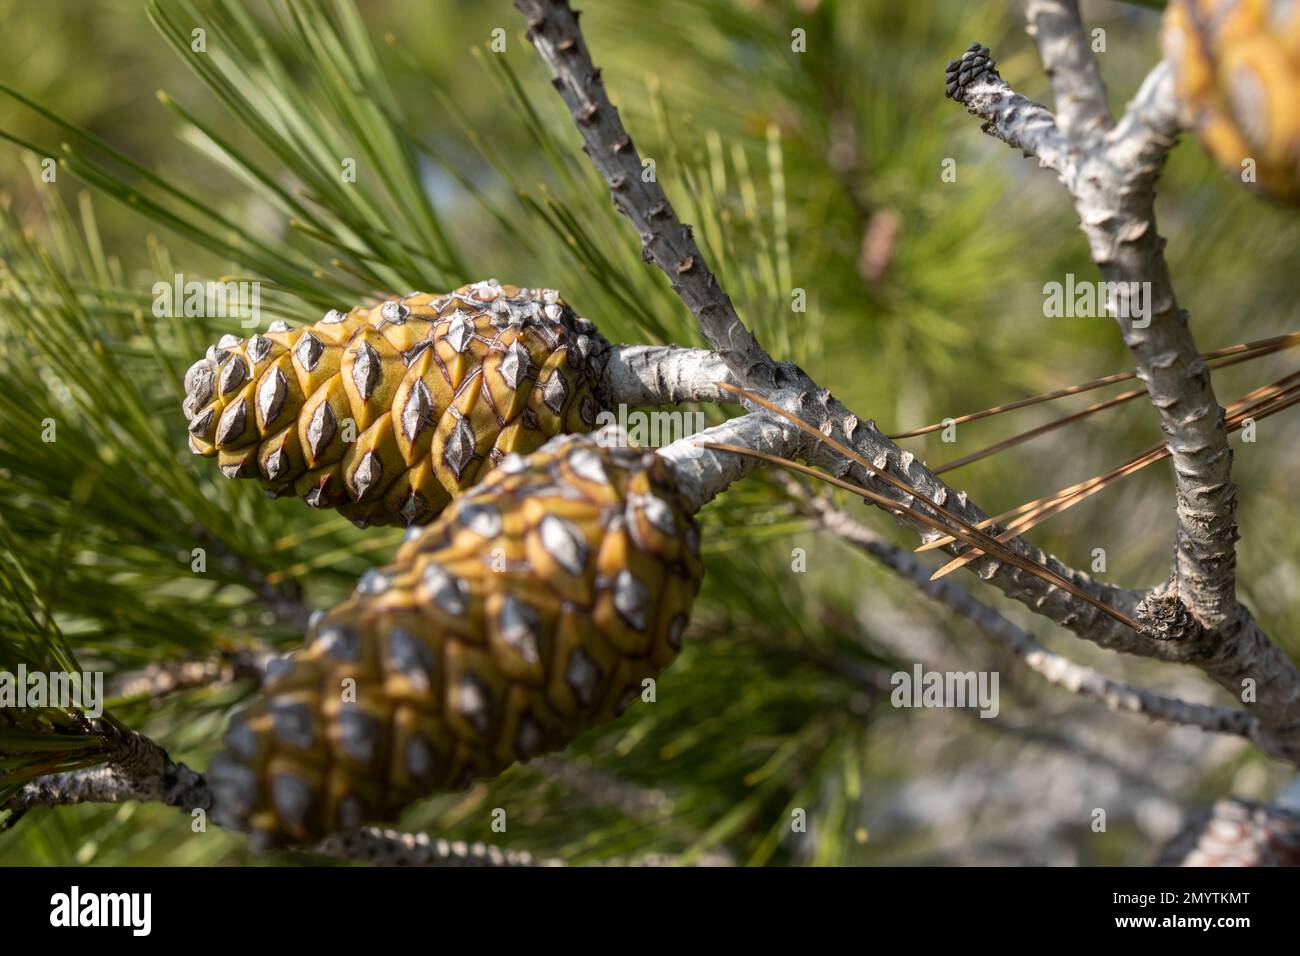 Pine branches with young cones against the blue sky Stock Photo